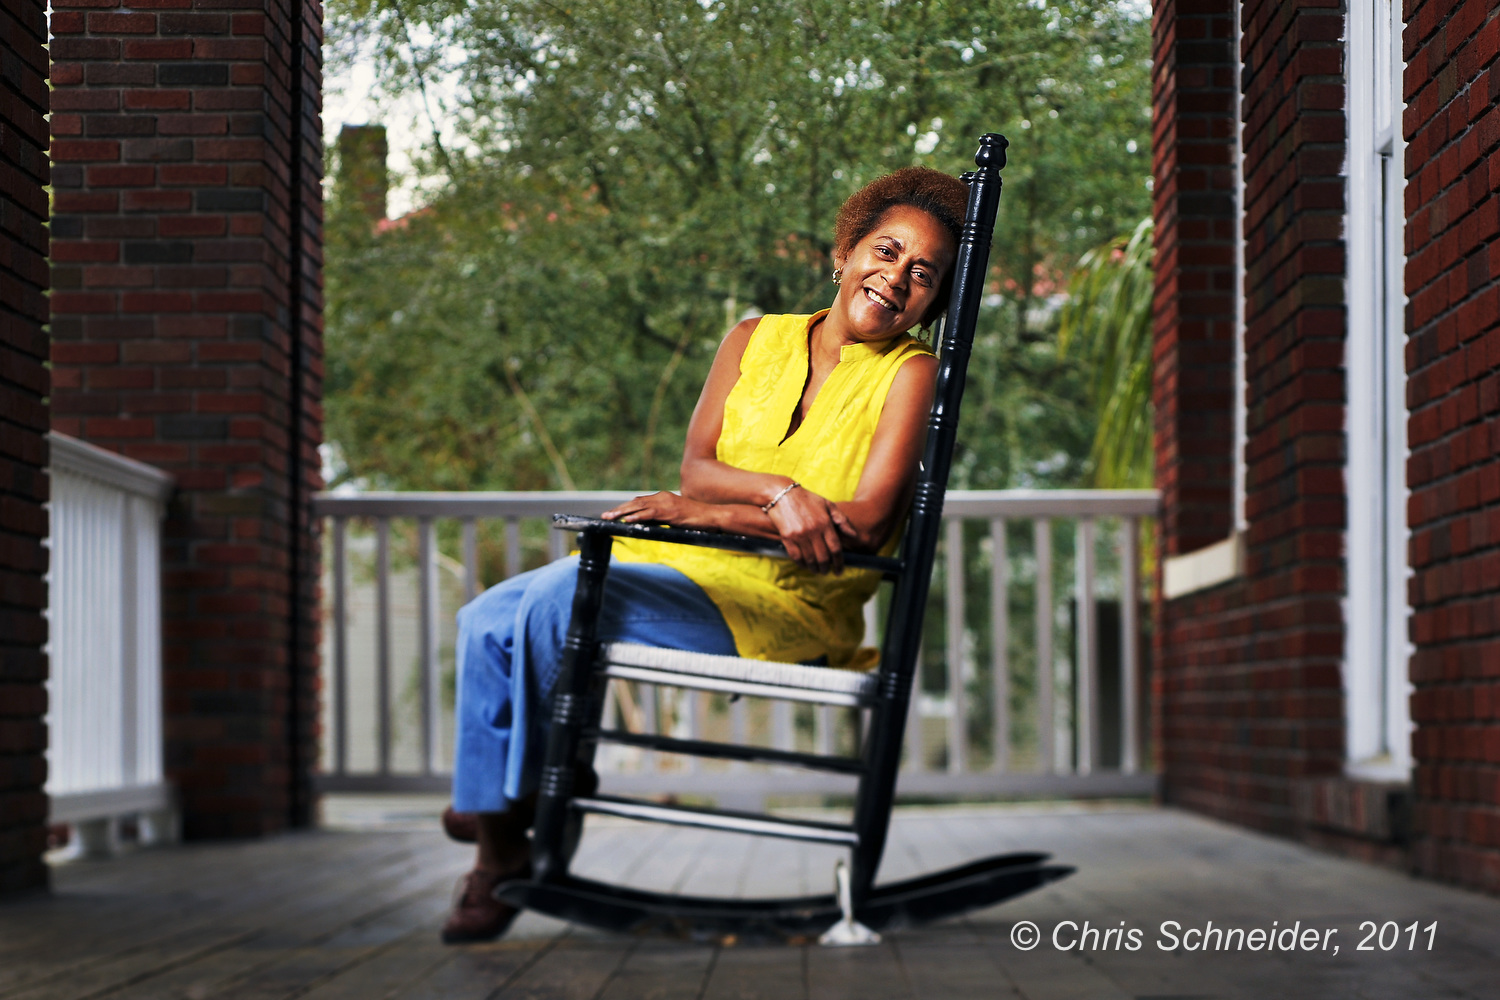 A portrait of a Mercy Housing resident at her home in Savannah, Georgia for the Mercy Housing annual report.